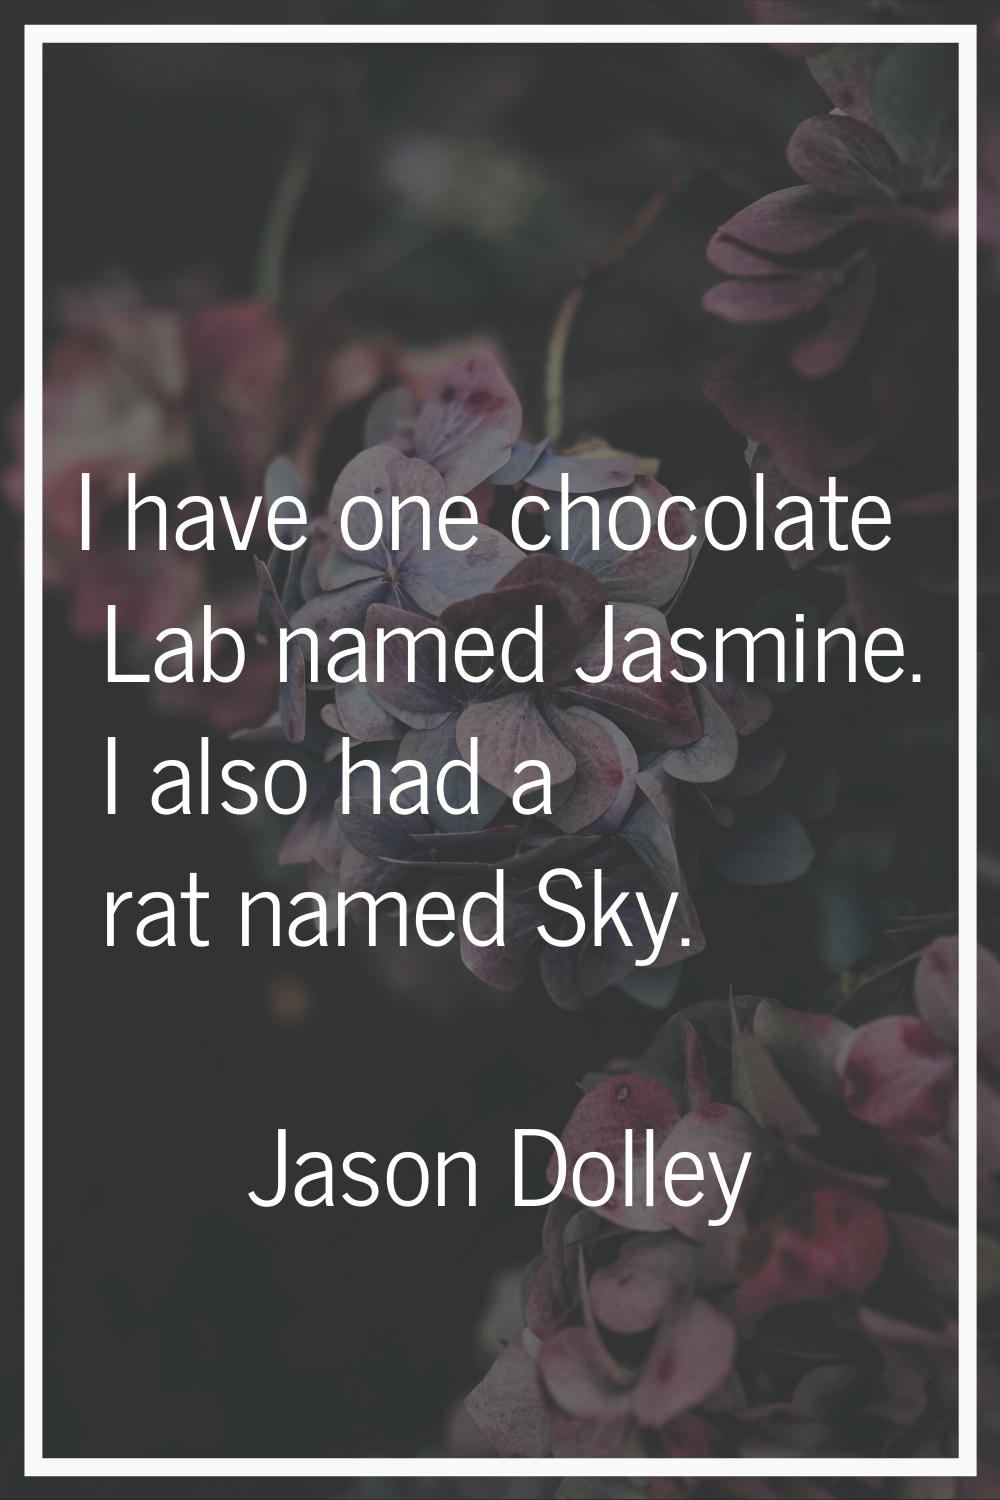 I have one chocolate Lab named Jasmine. I also had a rat named Sky.